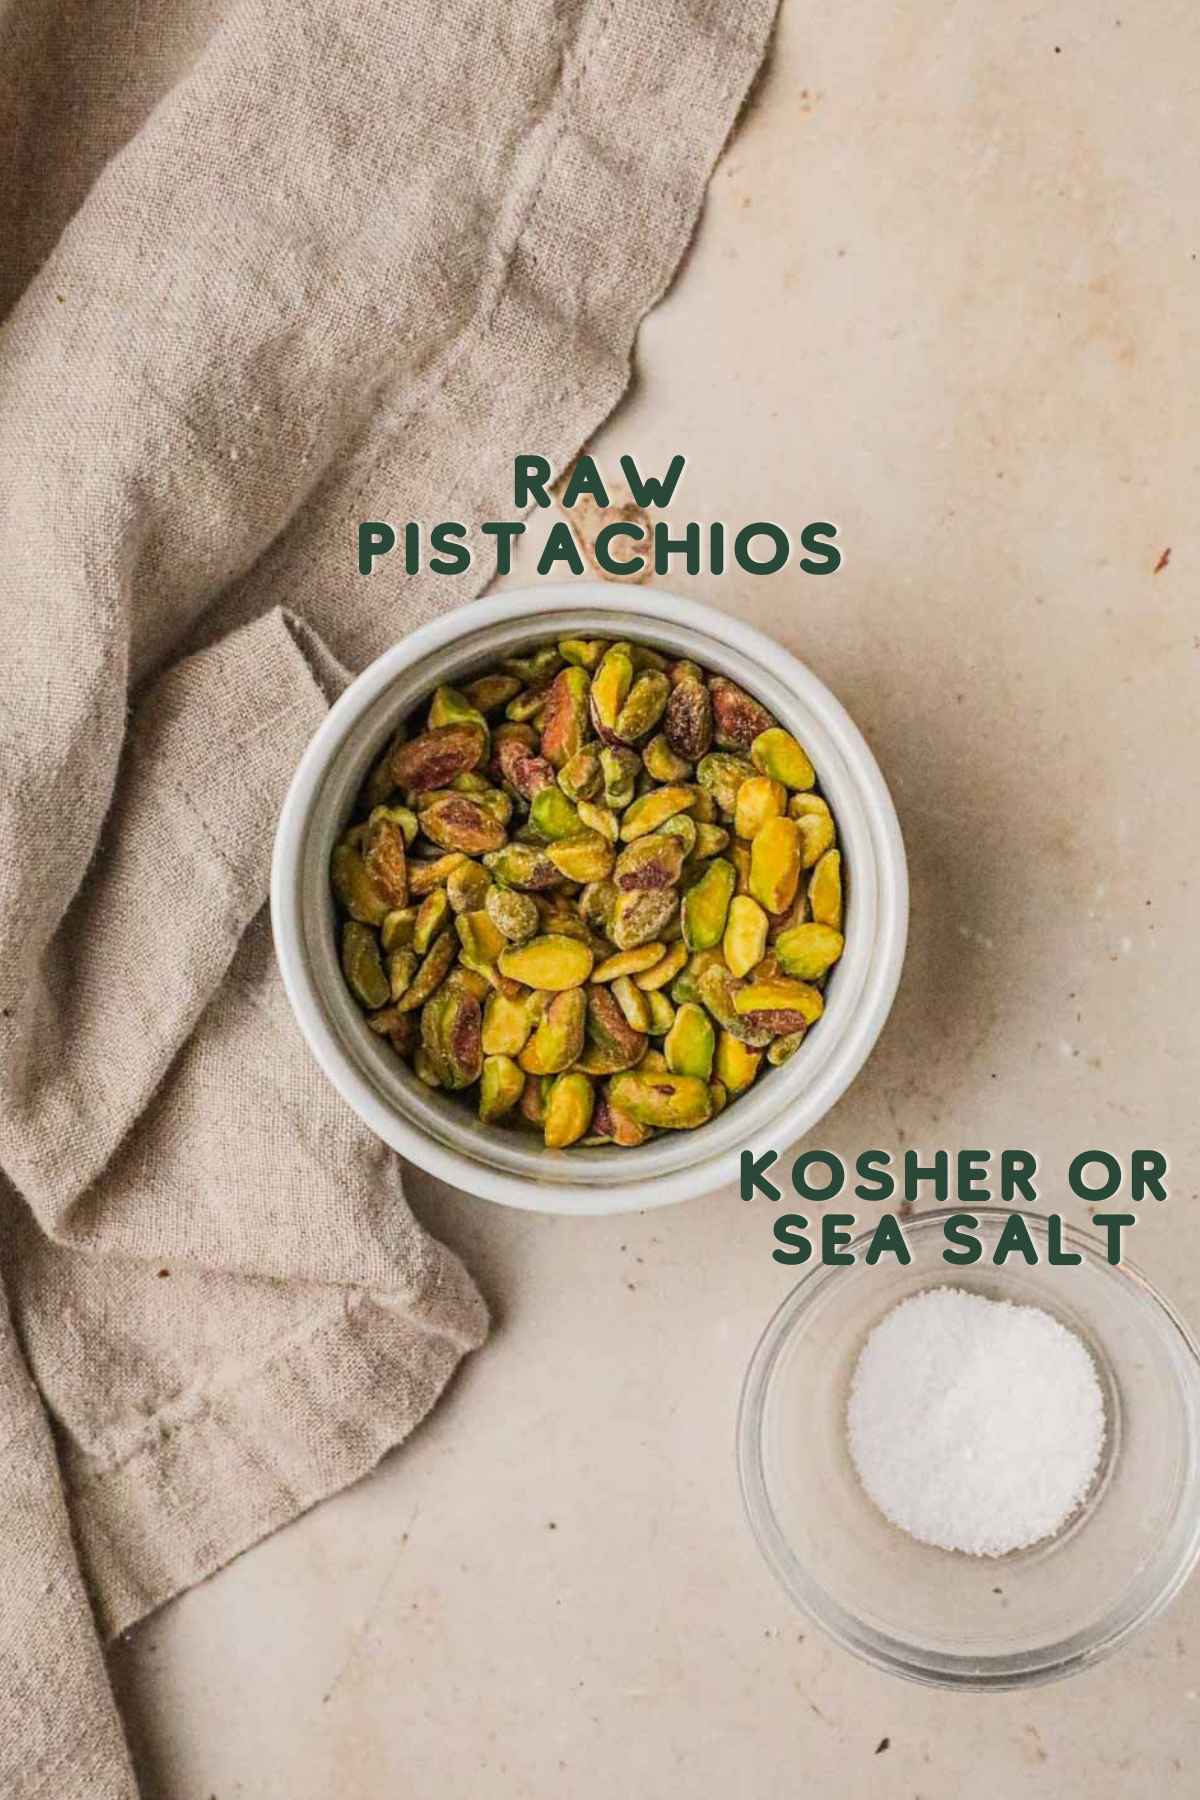 Ingredients to make roasted pistachios, raw shelled pistachios and sea salt or kosher salt.